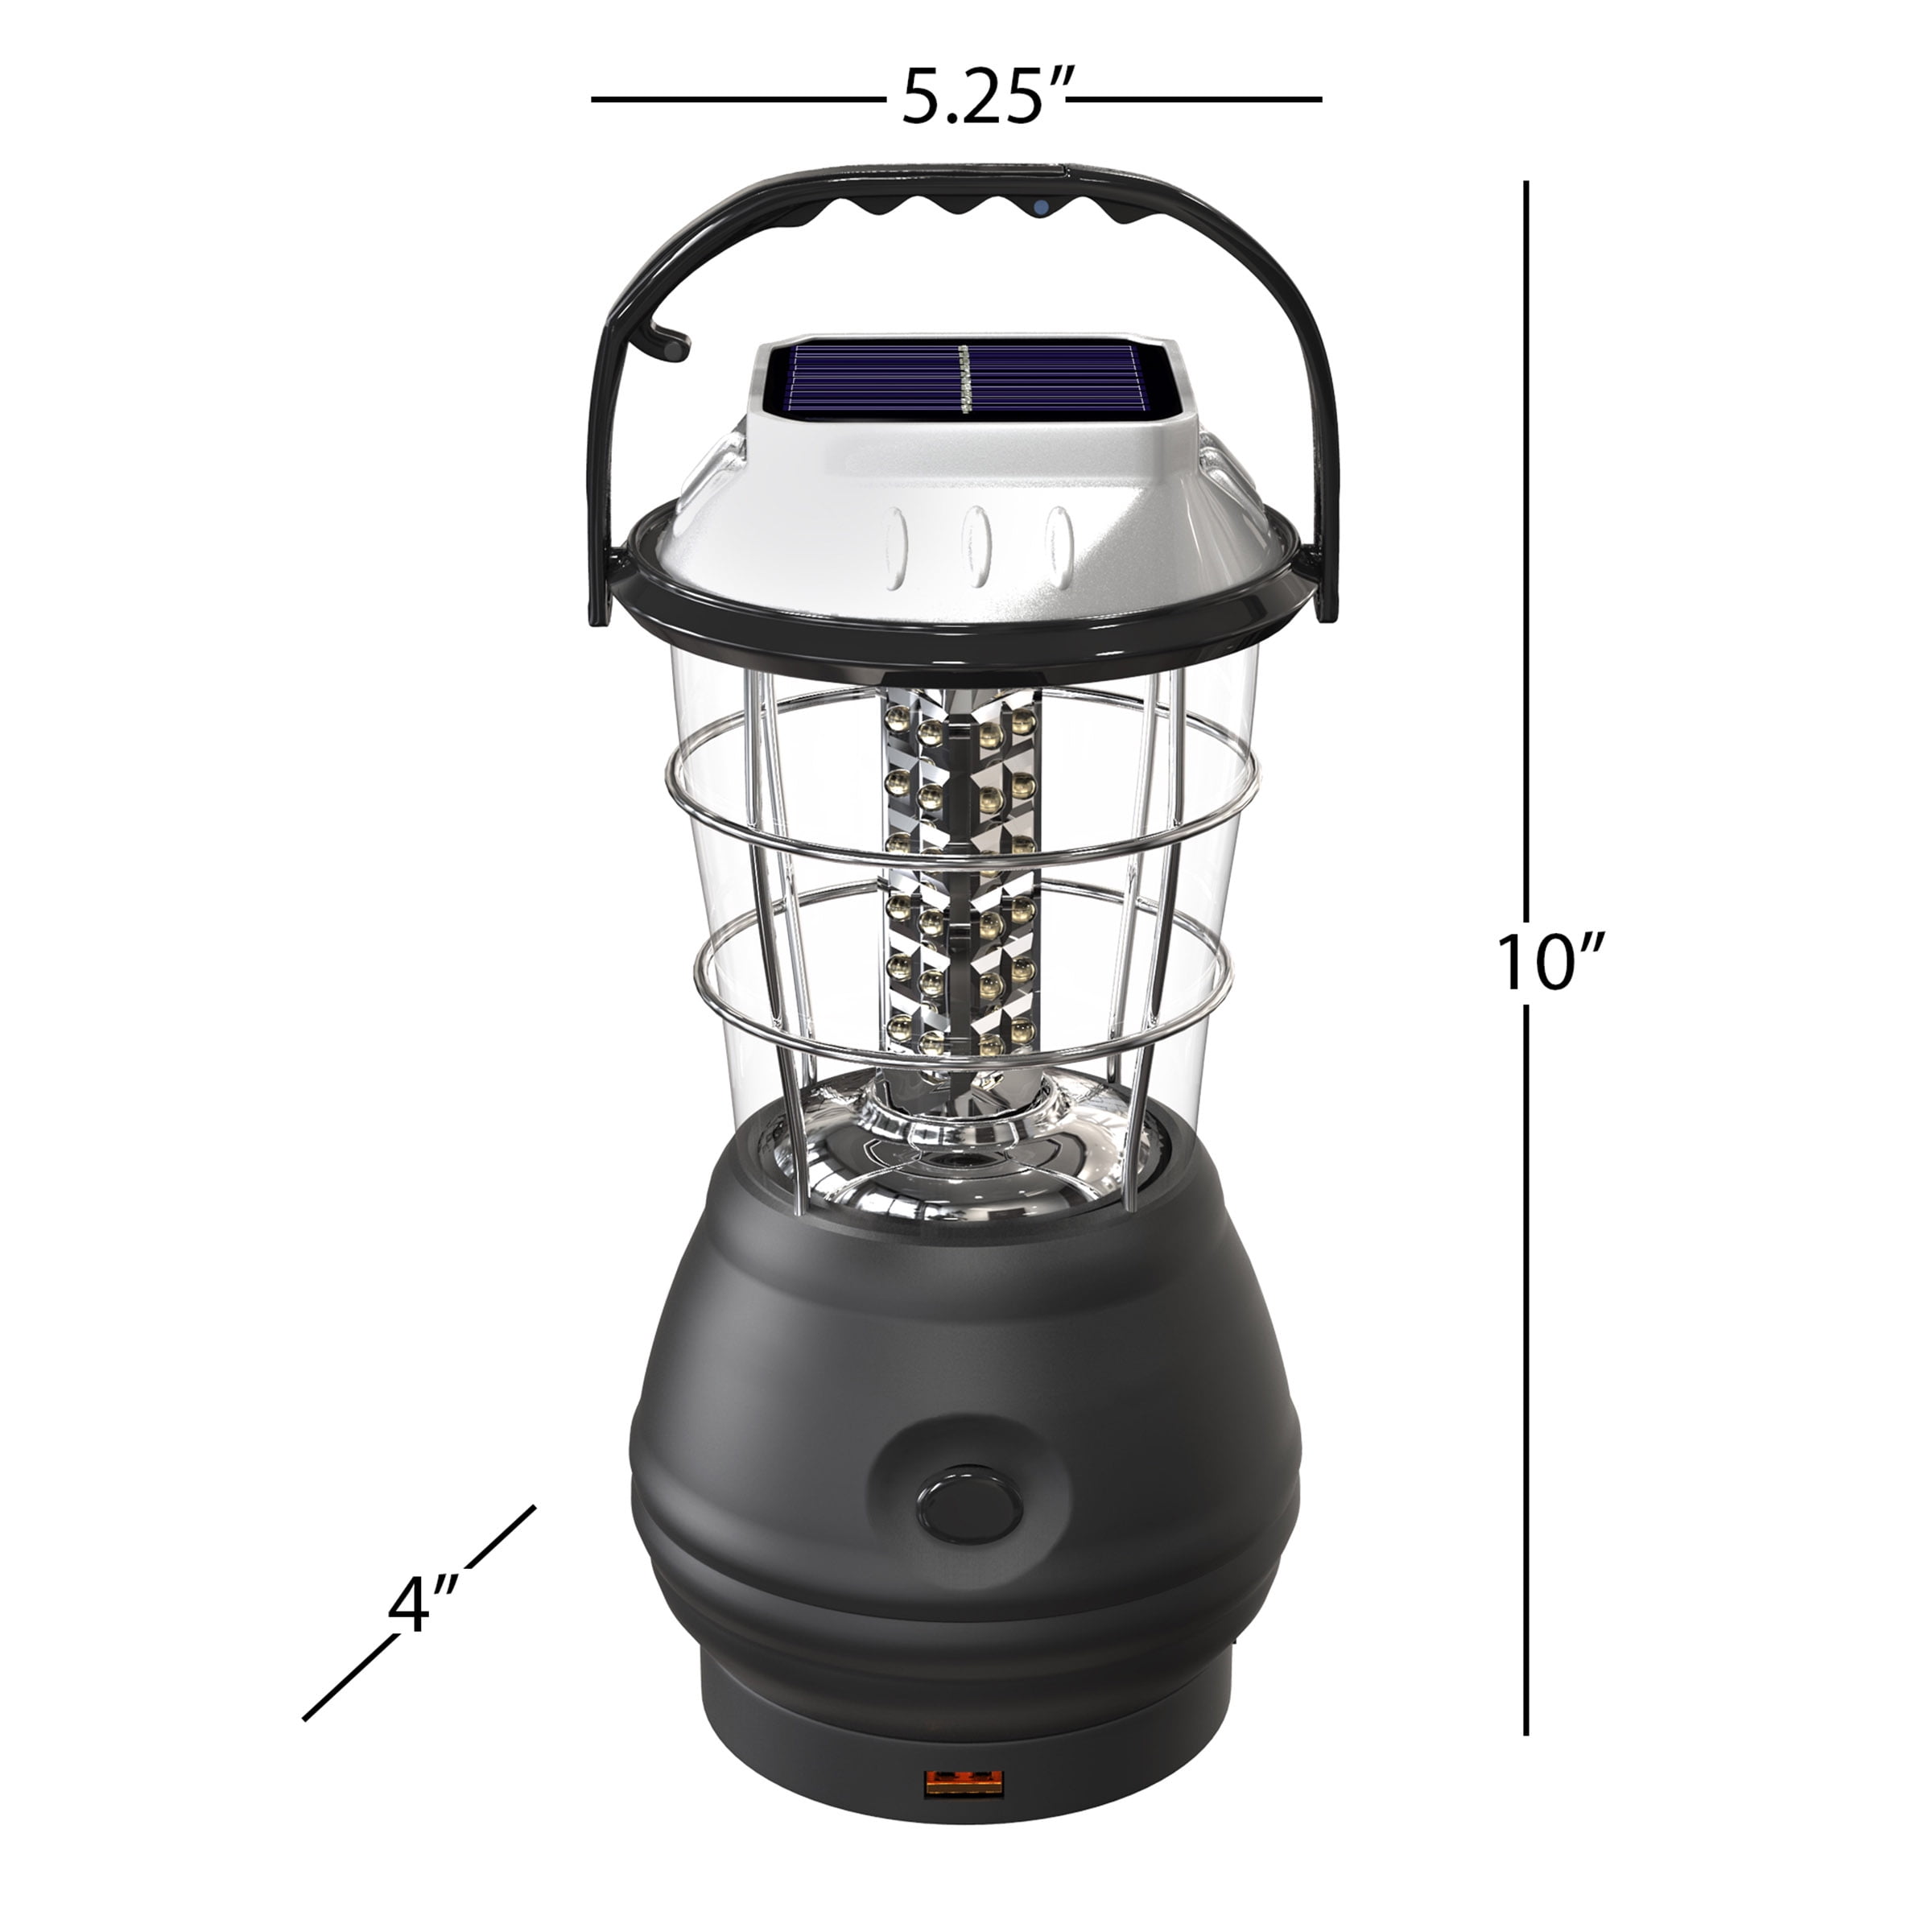 YouLoveIt Solar LED Lantern 36 LED Hand Crank Lantern 5 Way to Charge Hand  Crank Camp Camping Light Emergency Light for Home Power Outages Outdoor